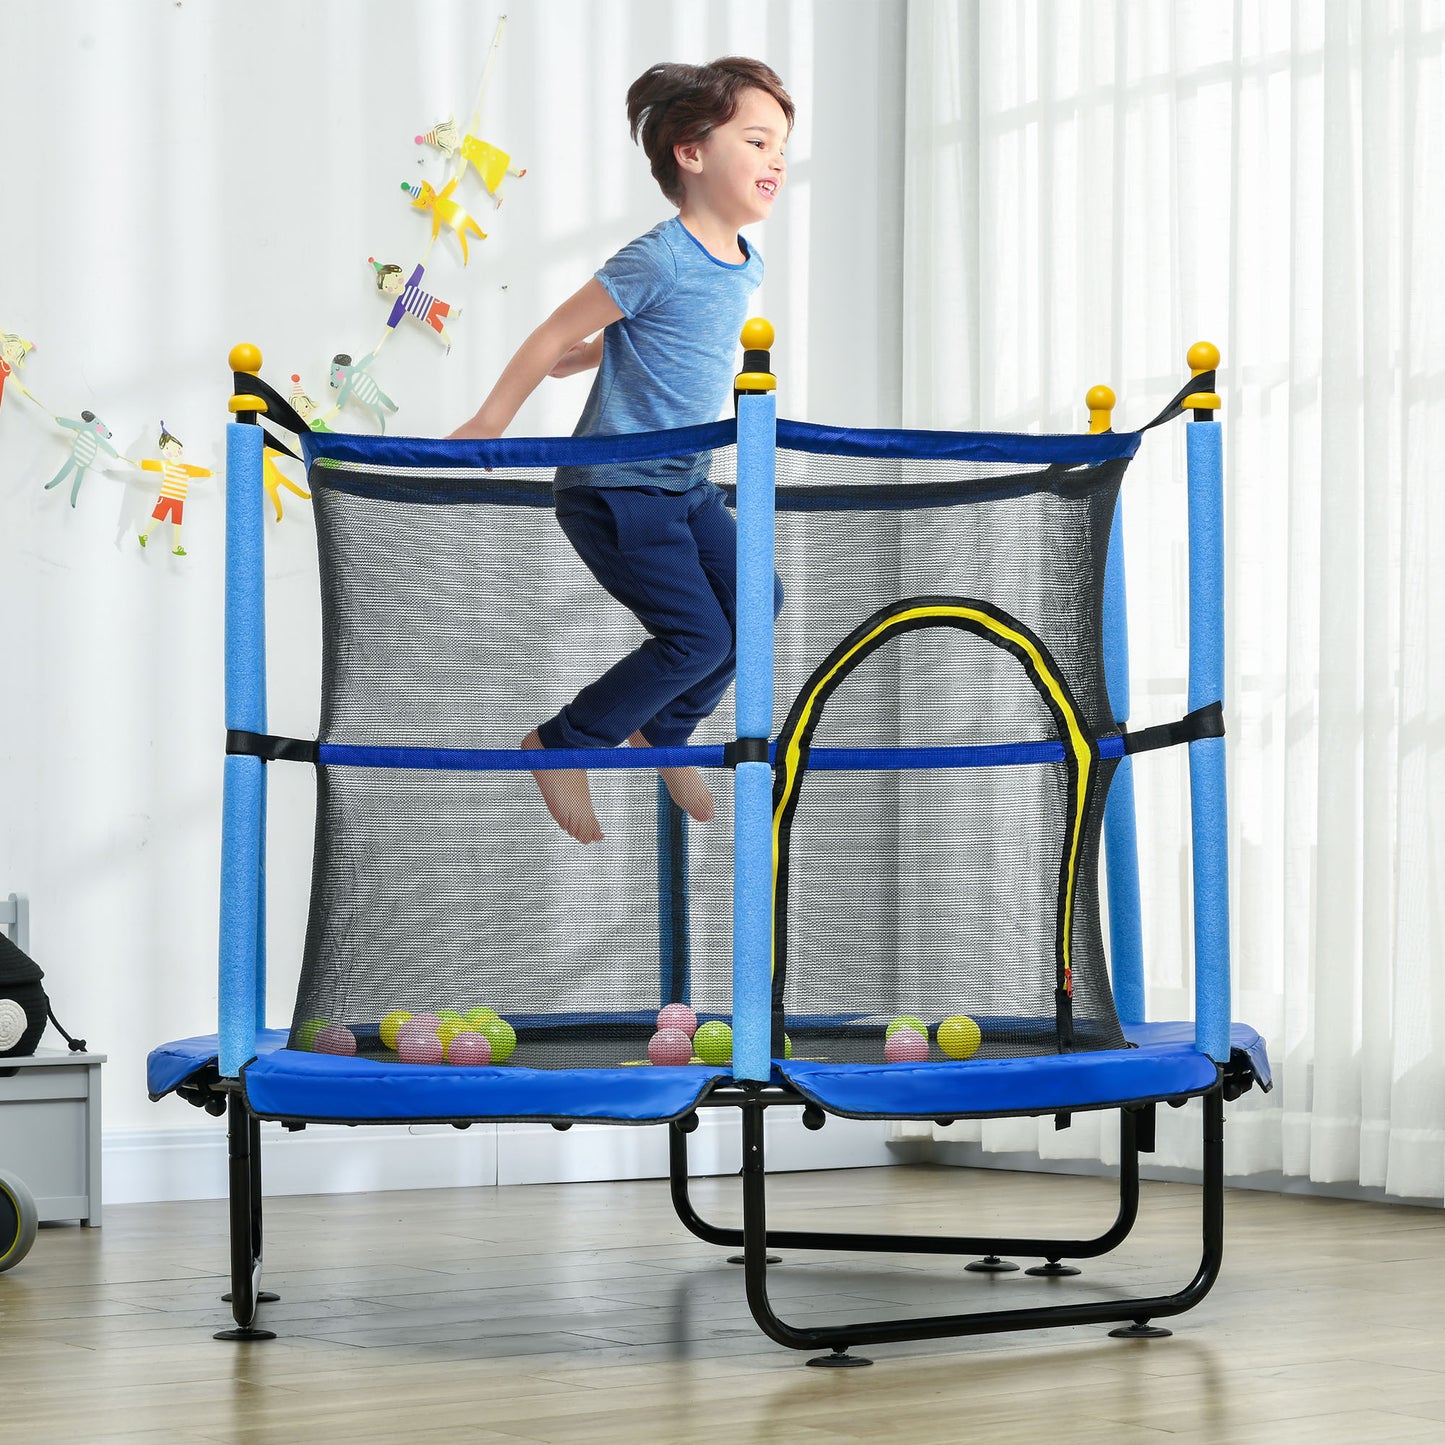 Qaba 4.6' Trampoline for Kids, 55 Inch Toddler Trampoline with Safety Enclosure & Ball Pit for Indoor or Outdoor Use, Built for Kids 3-10 Years, Blue